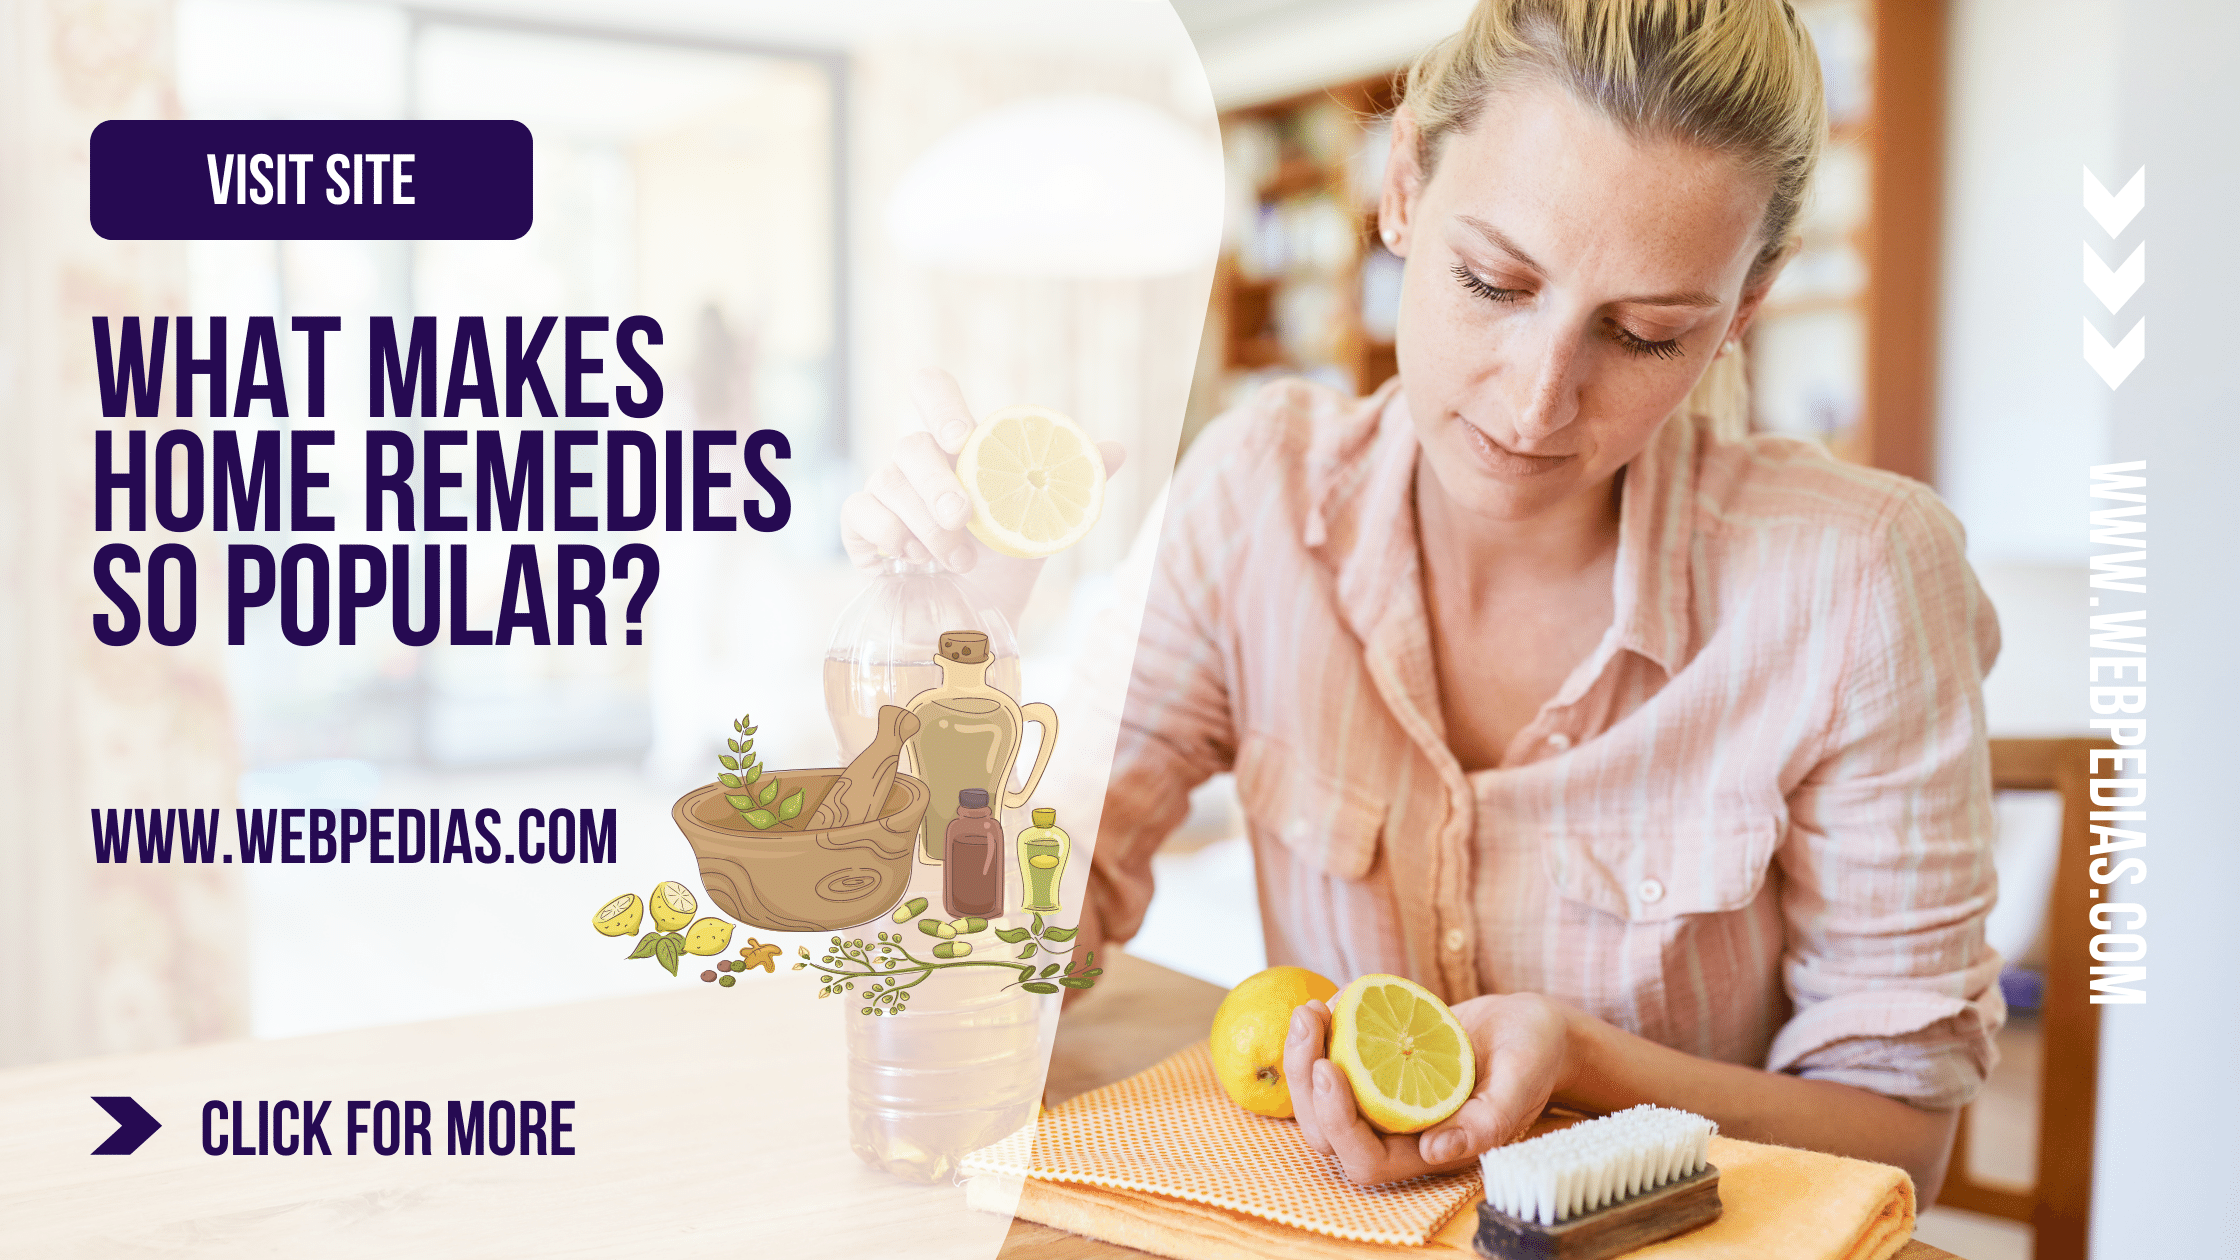 What Makes Home Remedies So Popular?